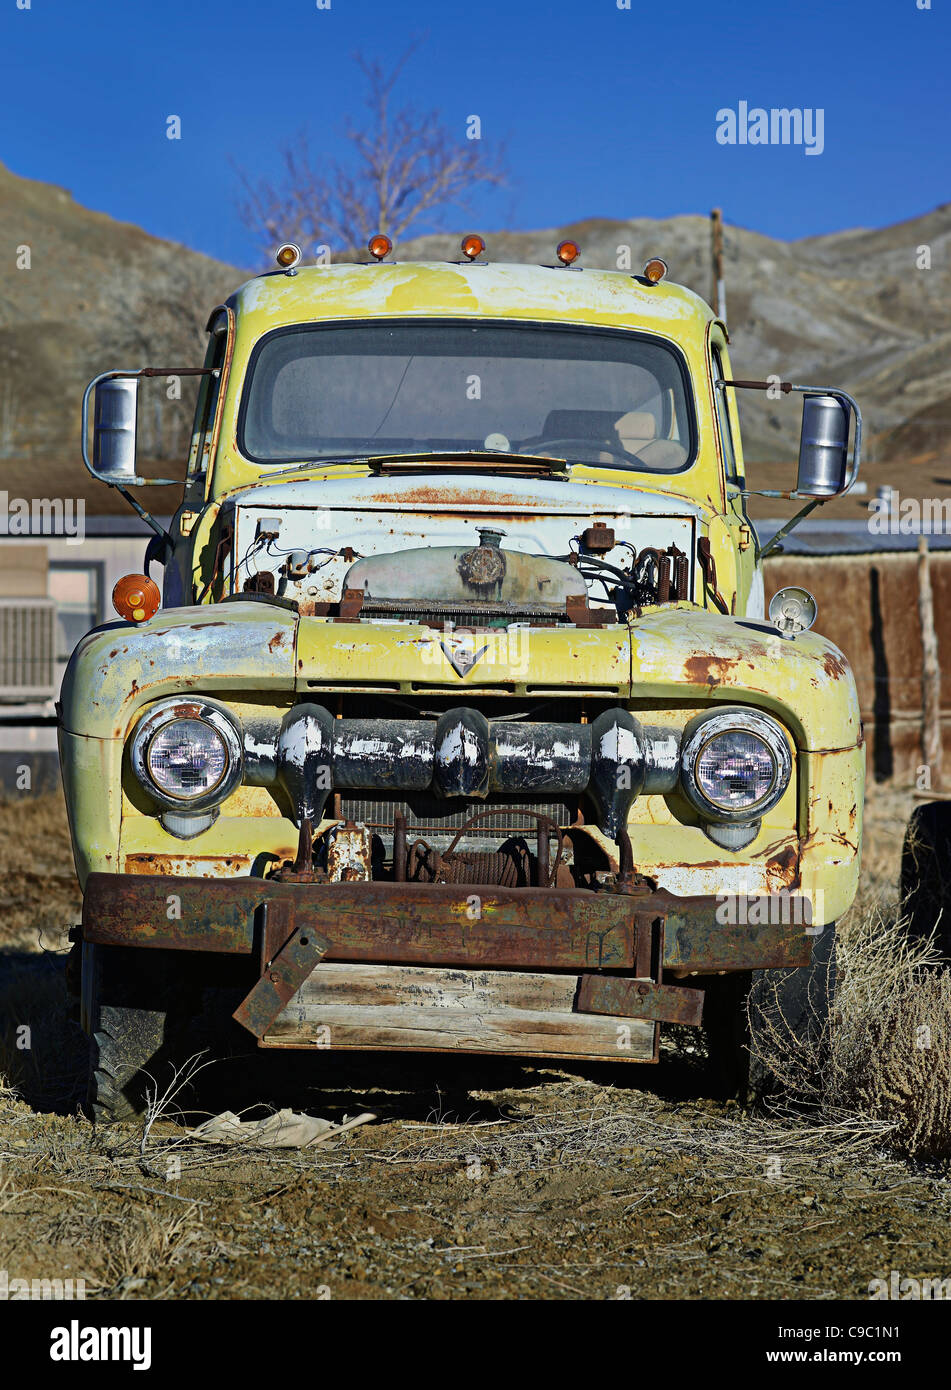 Old Abandoned Junked camion jaune, Nevada, USA Banque D'Images